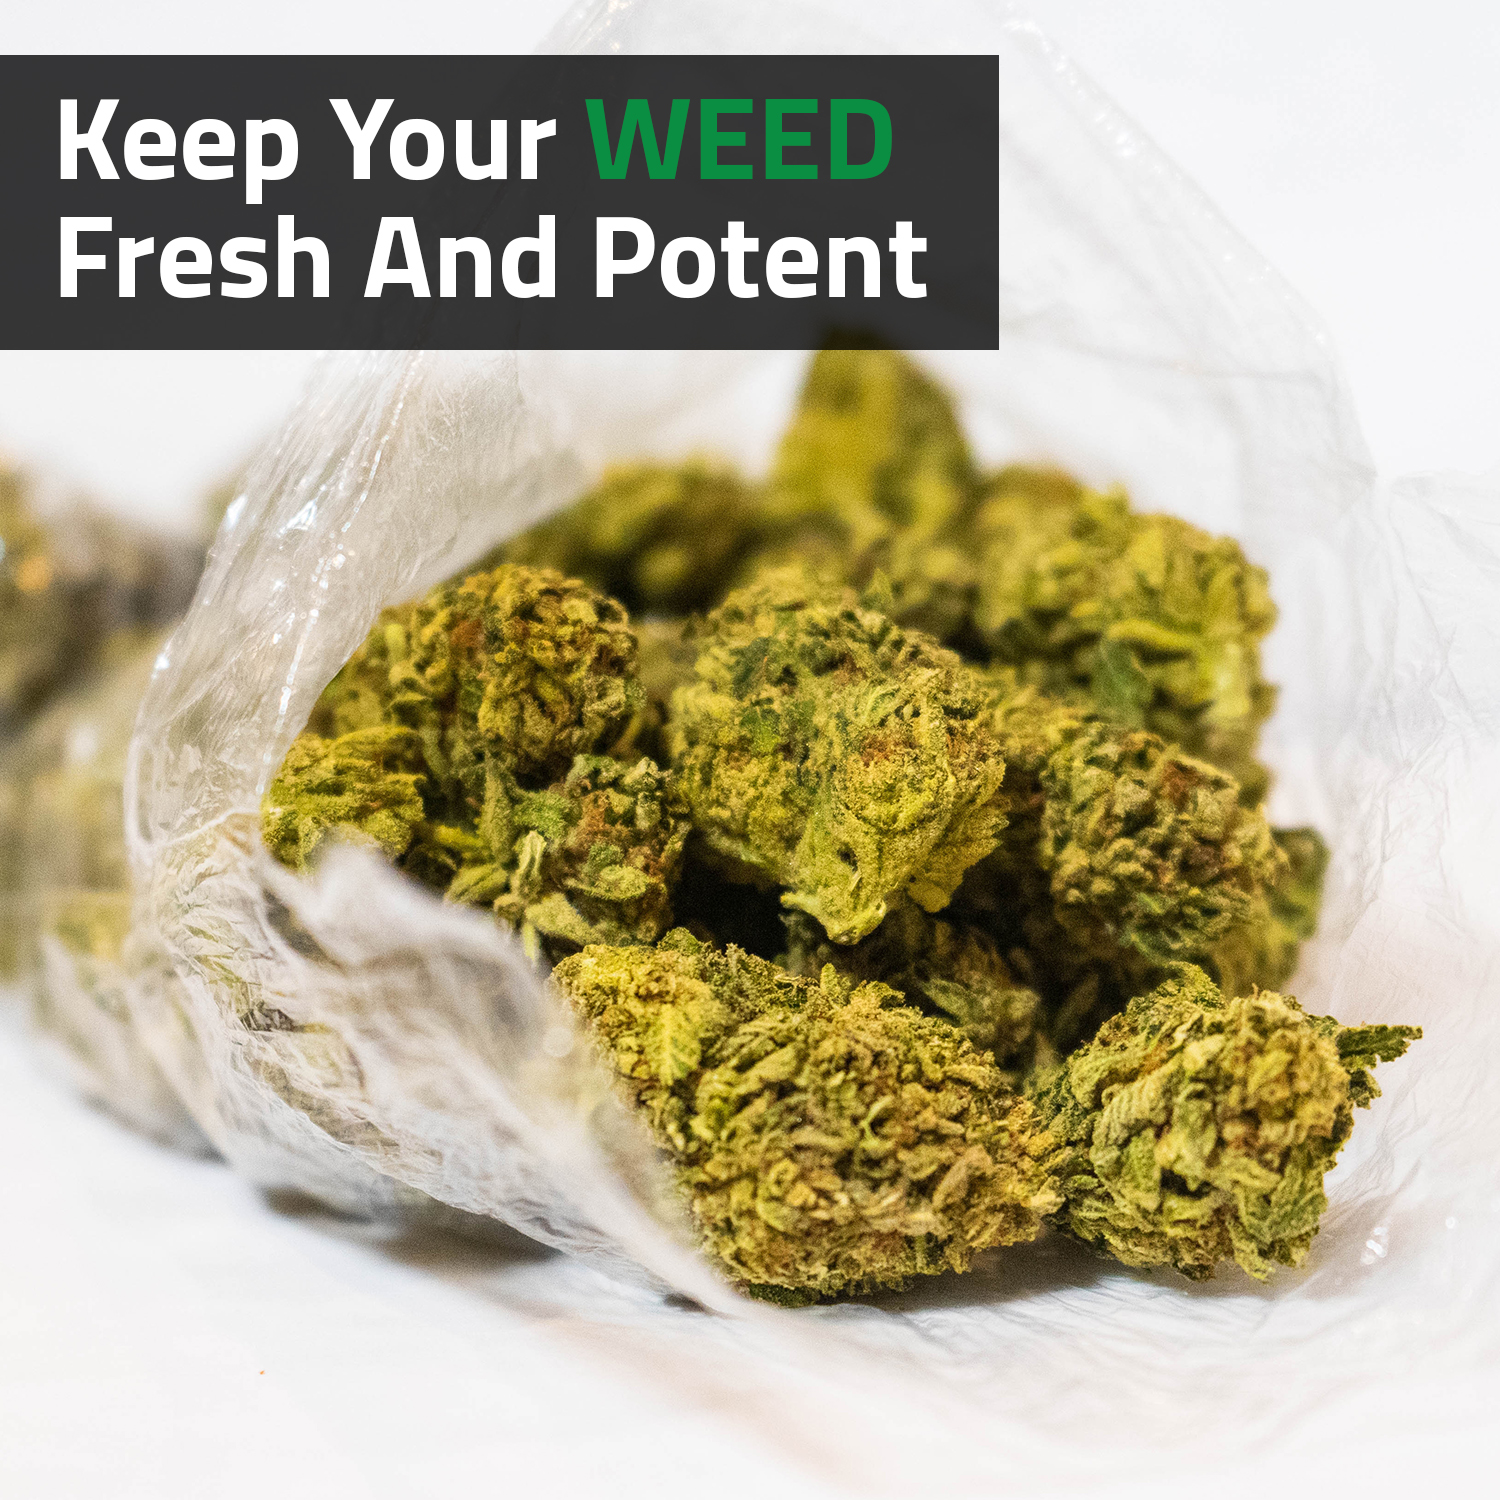 Keep Your Weed Fresh And Potent